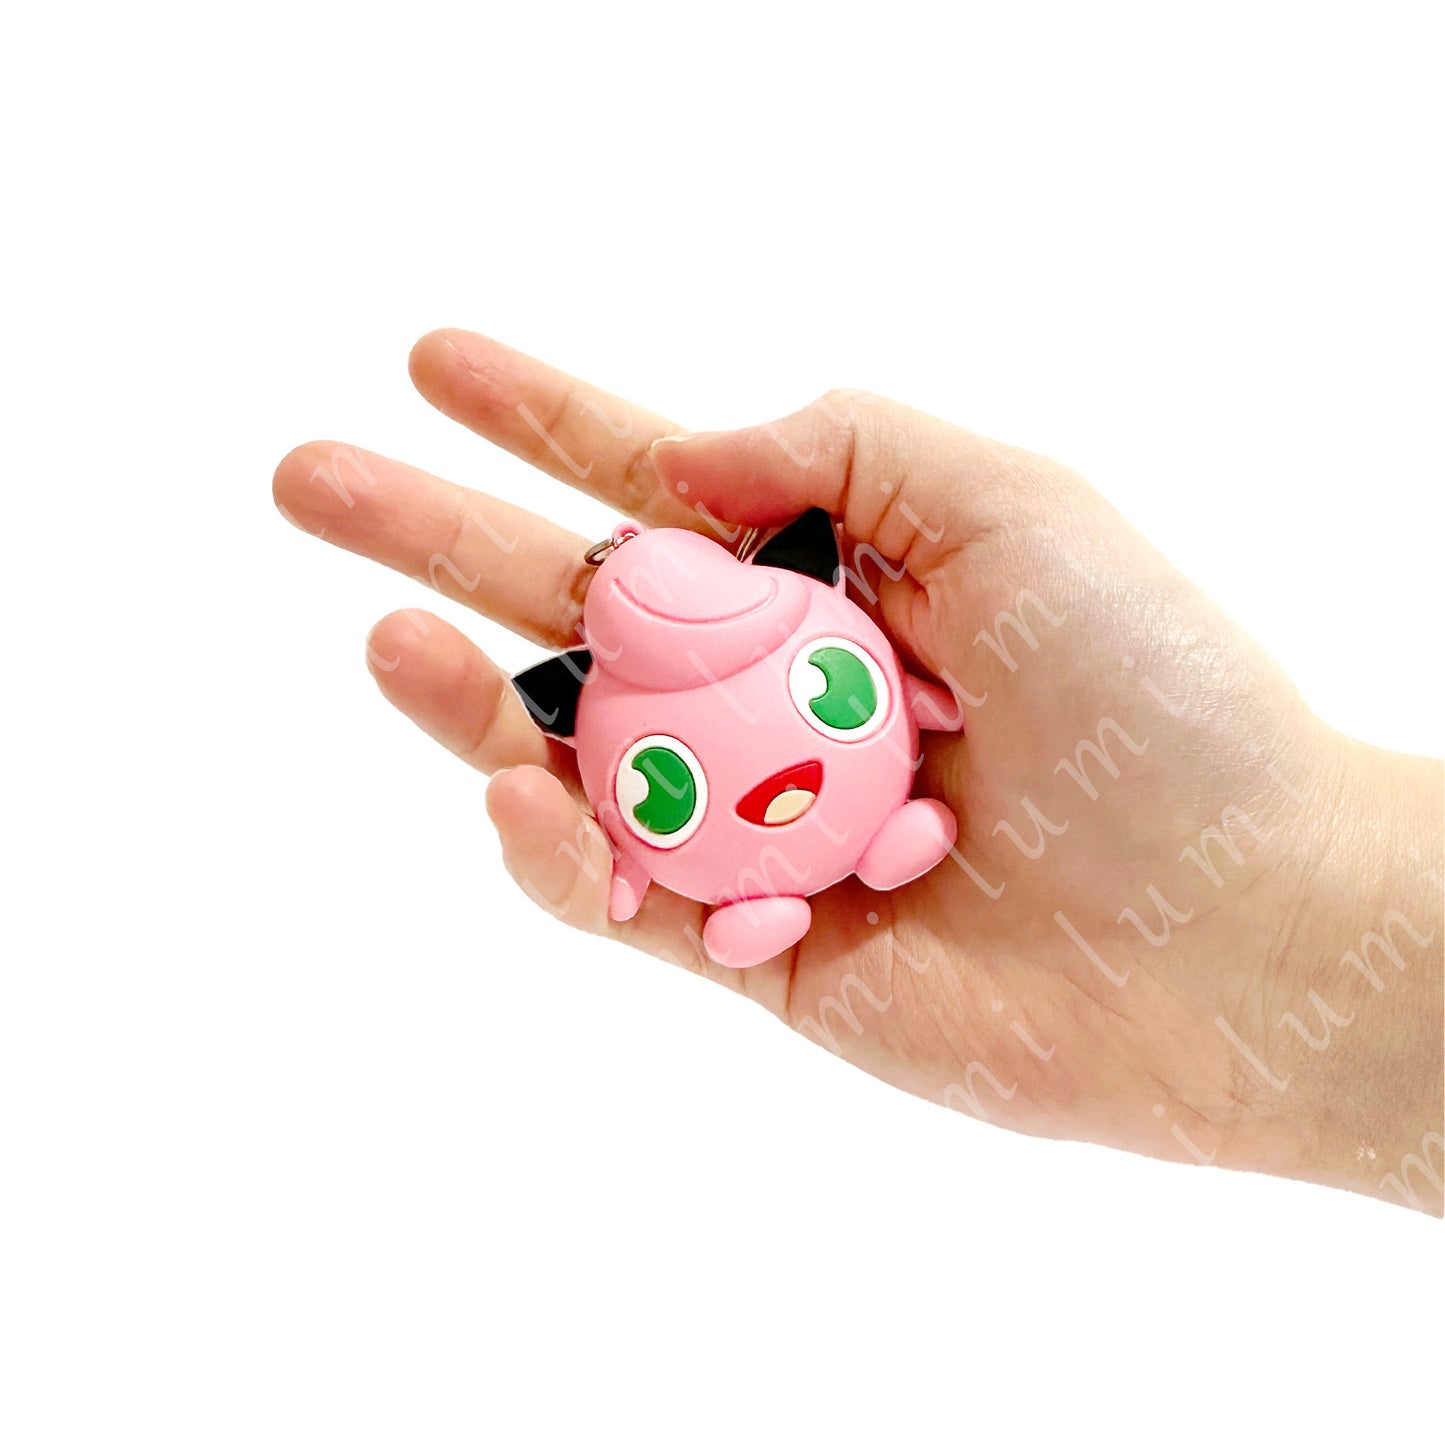 Image of a cute Jigglypuff Keychain, a perfect Pokémon-inspired accessory for your keys.